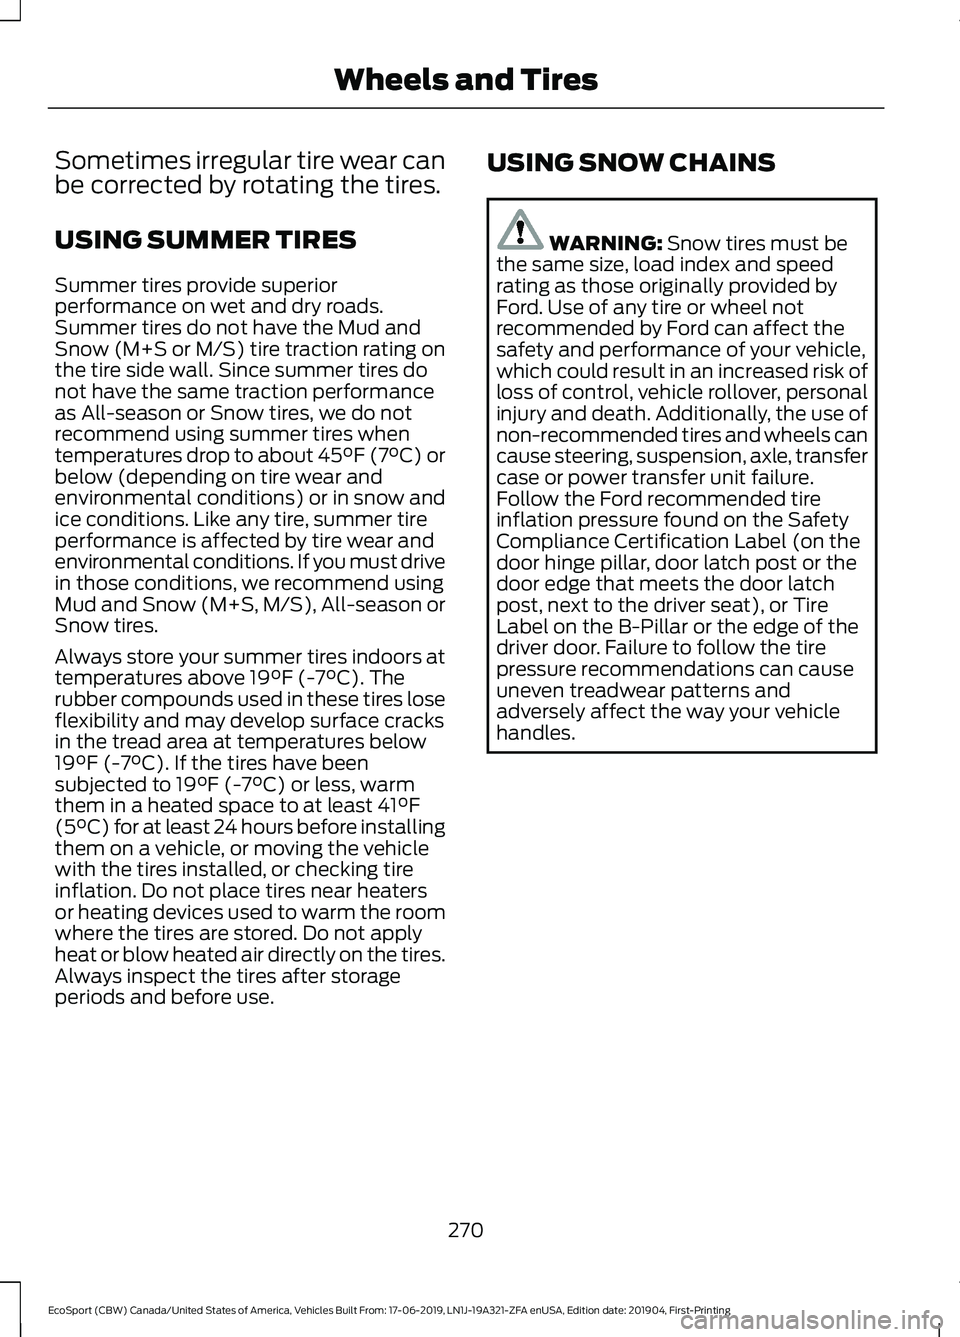 FORD ECOSPORT 2020  Owners Manual Sometimes irregular tire wear canbe corrected by rotating the tires.
USING SUMMER TIRES
Summer tires provide superiorperformance on wet and dry roads.Summer tires do not have the Mud andSnow (M+S or M